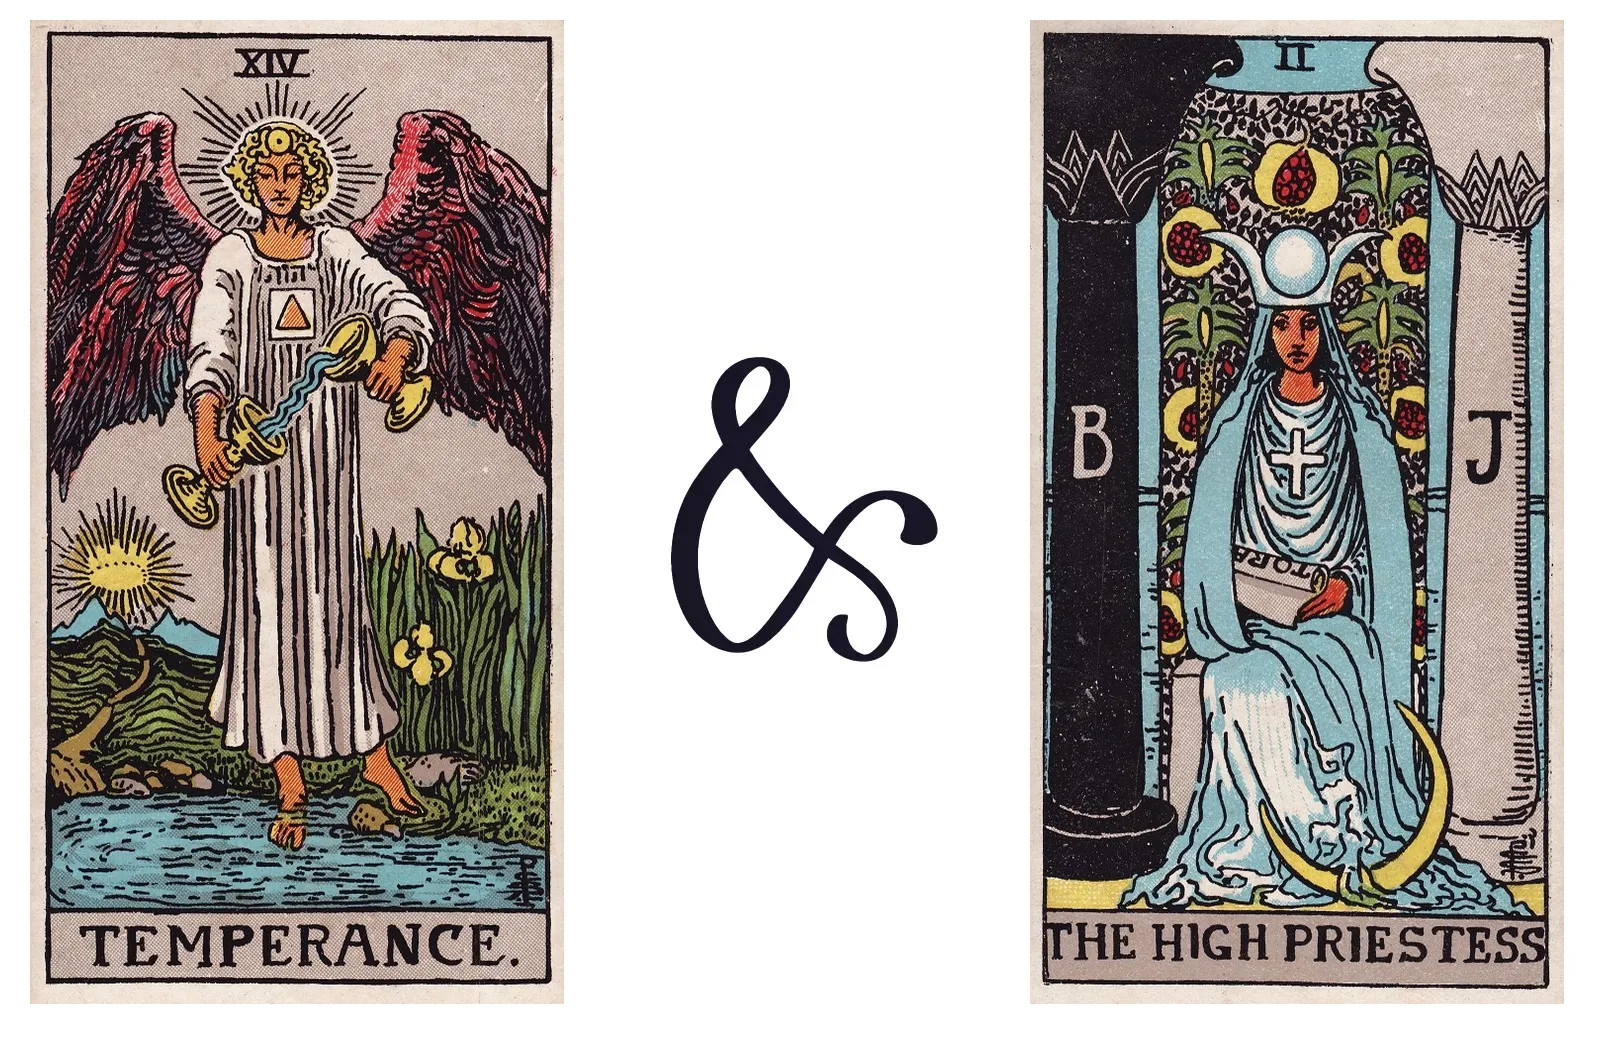 Temperance and The High Priestess